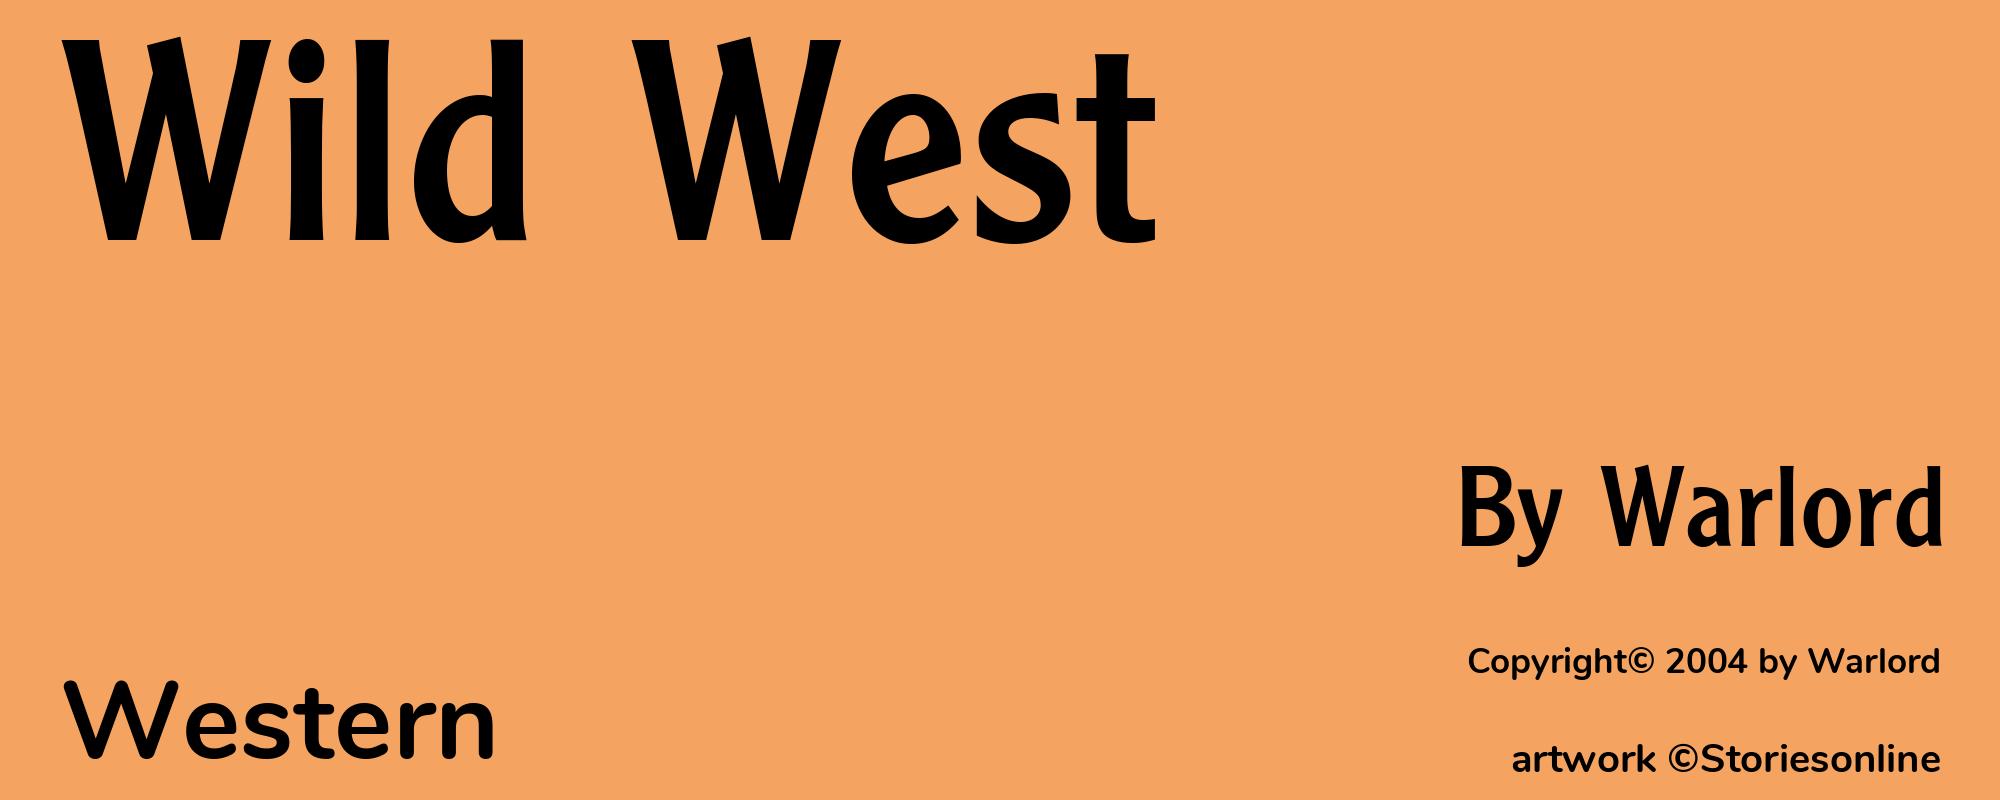 Wild West - Cover